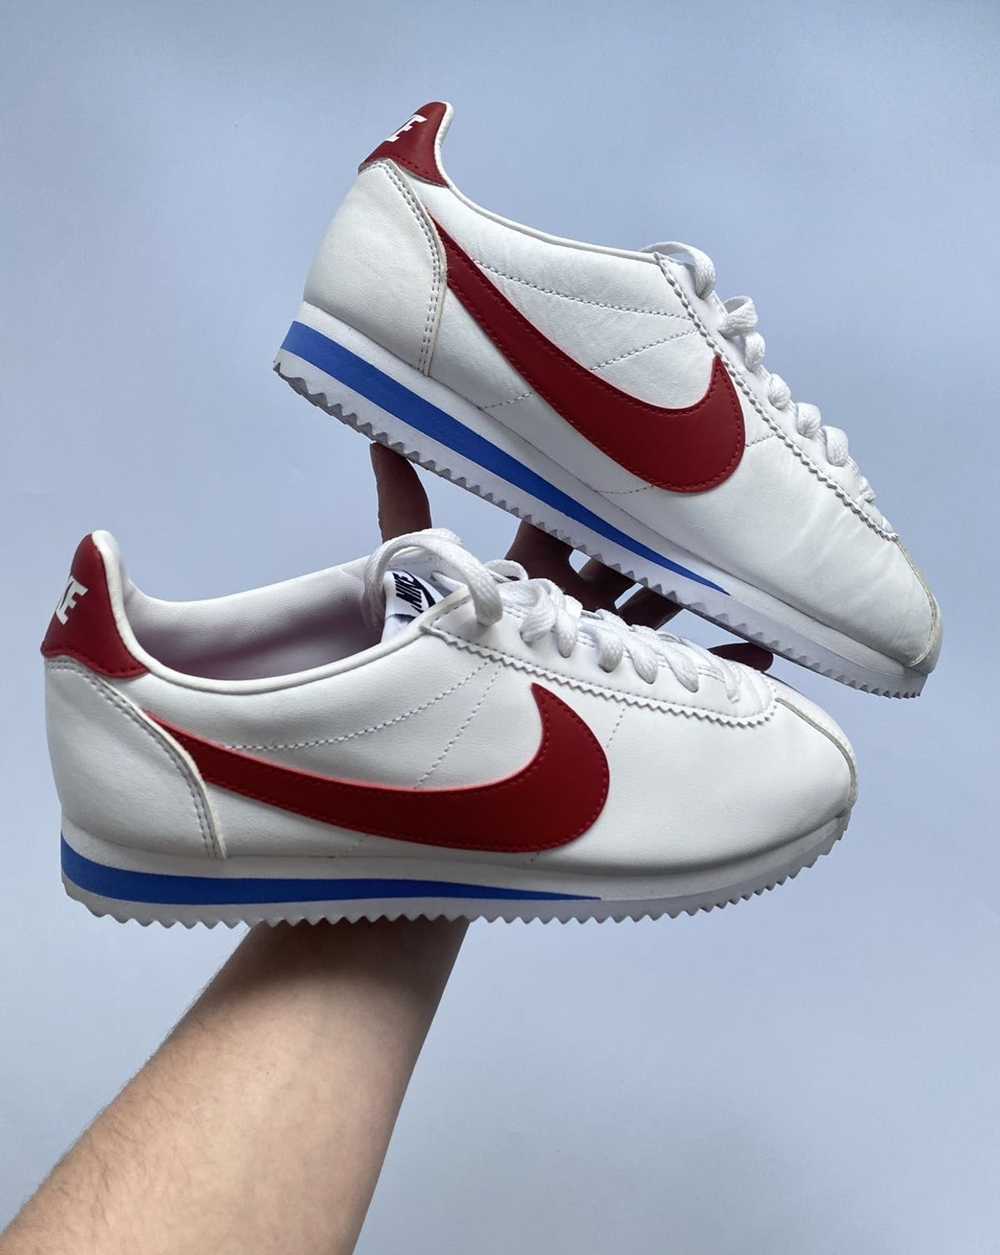 Nike Nike Cortez “Forrest Gump” sneakers - image 1